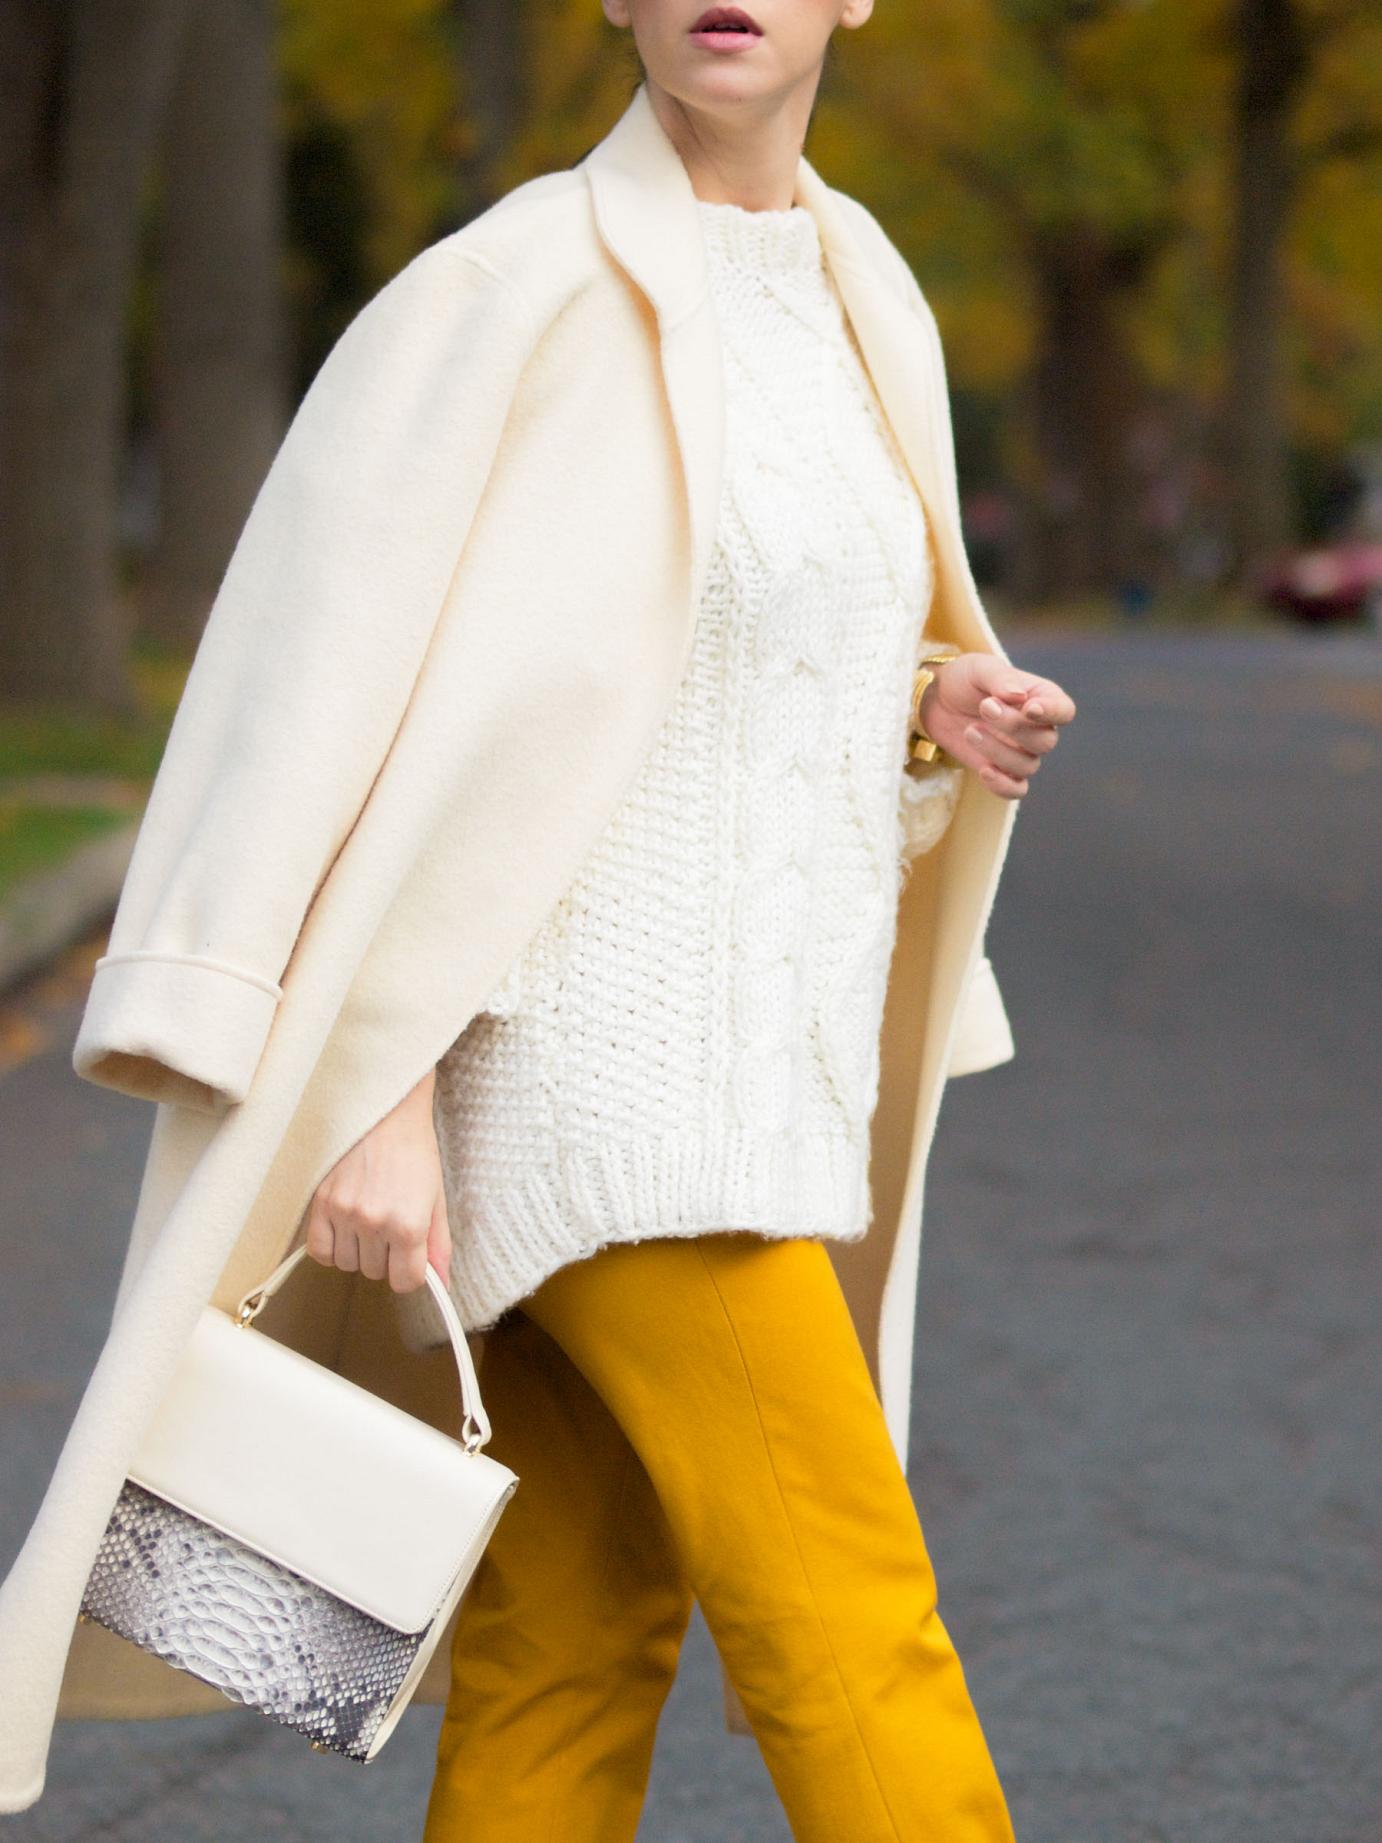 bittersweet colours, fall coats, fall colors, fall street style, chunky sweater, yellow pants, banana republic, leopard print shoes, valentino coat, vintage coat, street style, 20 weeks, maternity style, GIVEAWAY, world wide giveaway, 